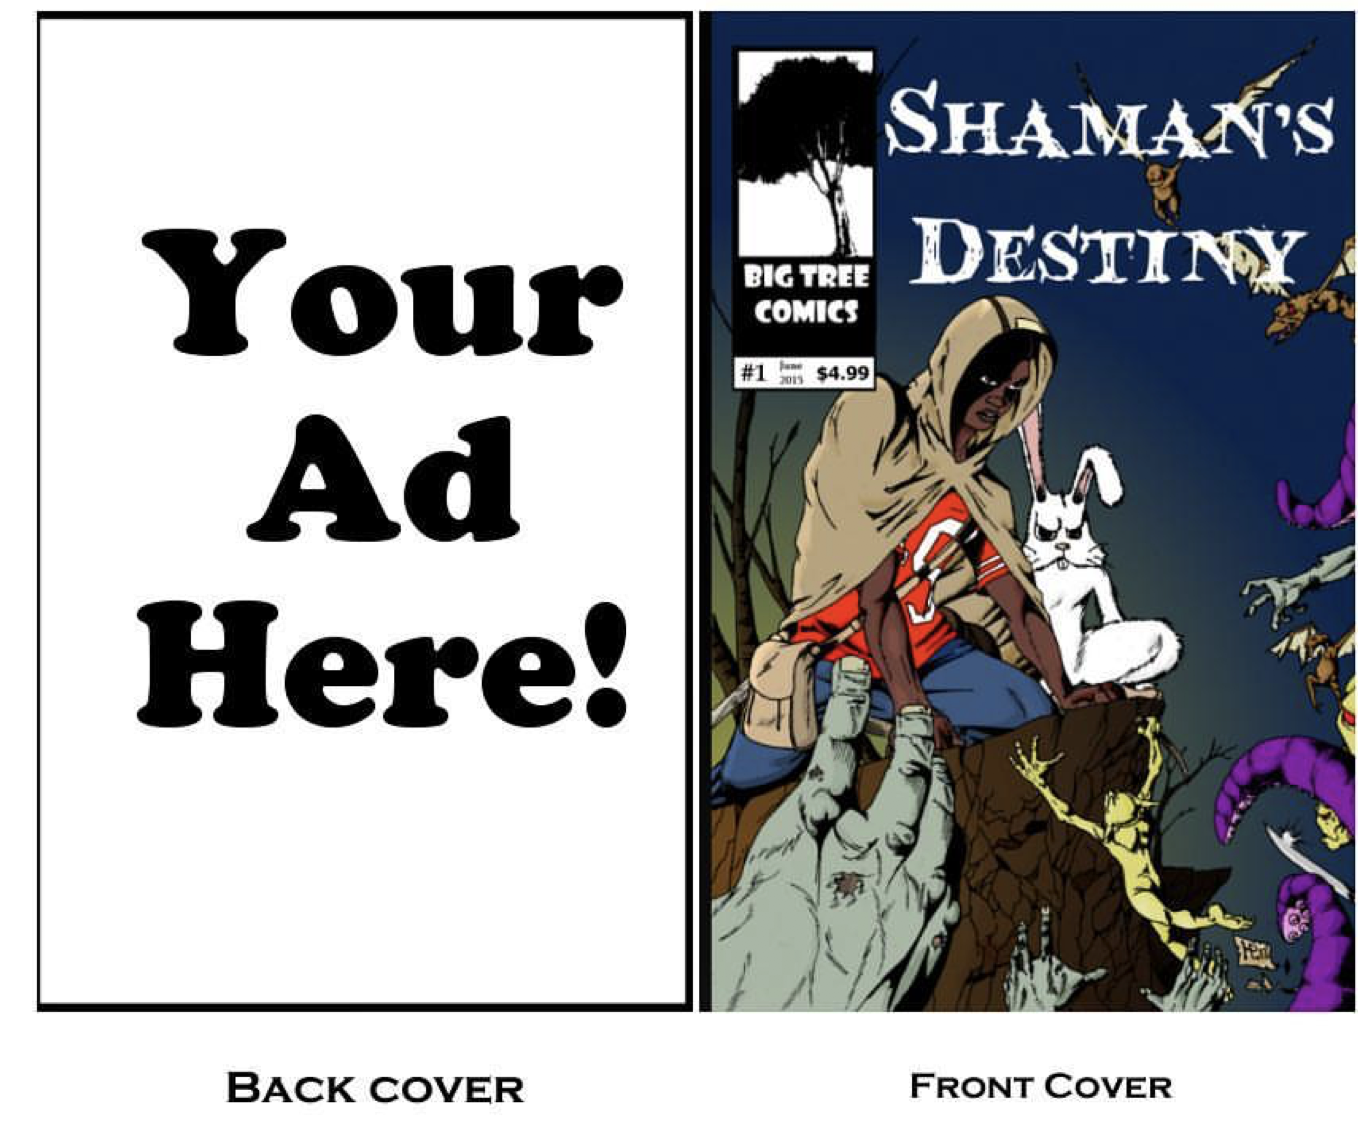 Time is running out, but there’s still time to have your ad appear on the back cover of Shaman’s Destiny